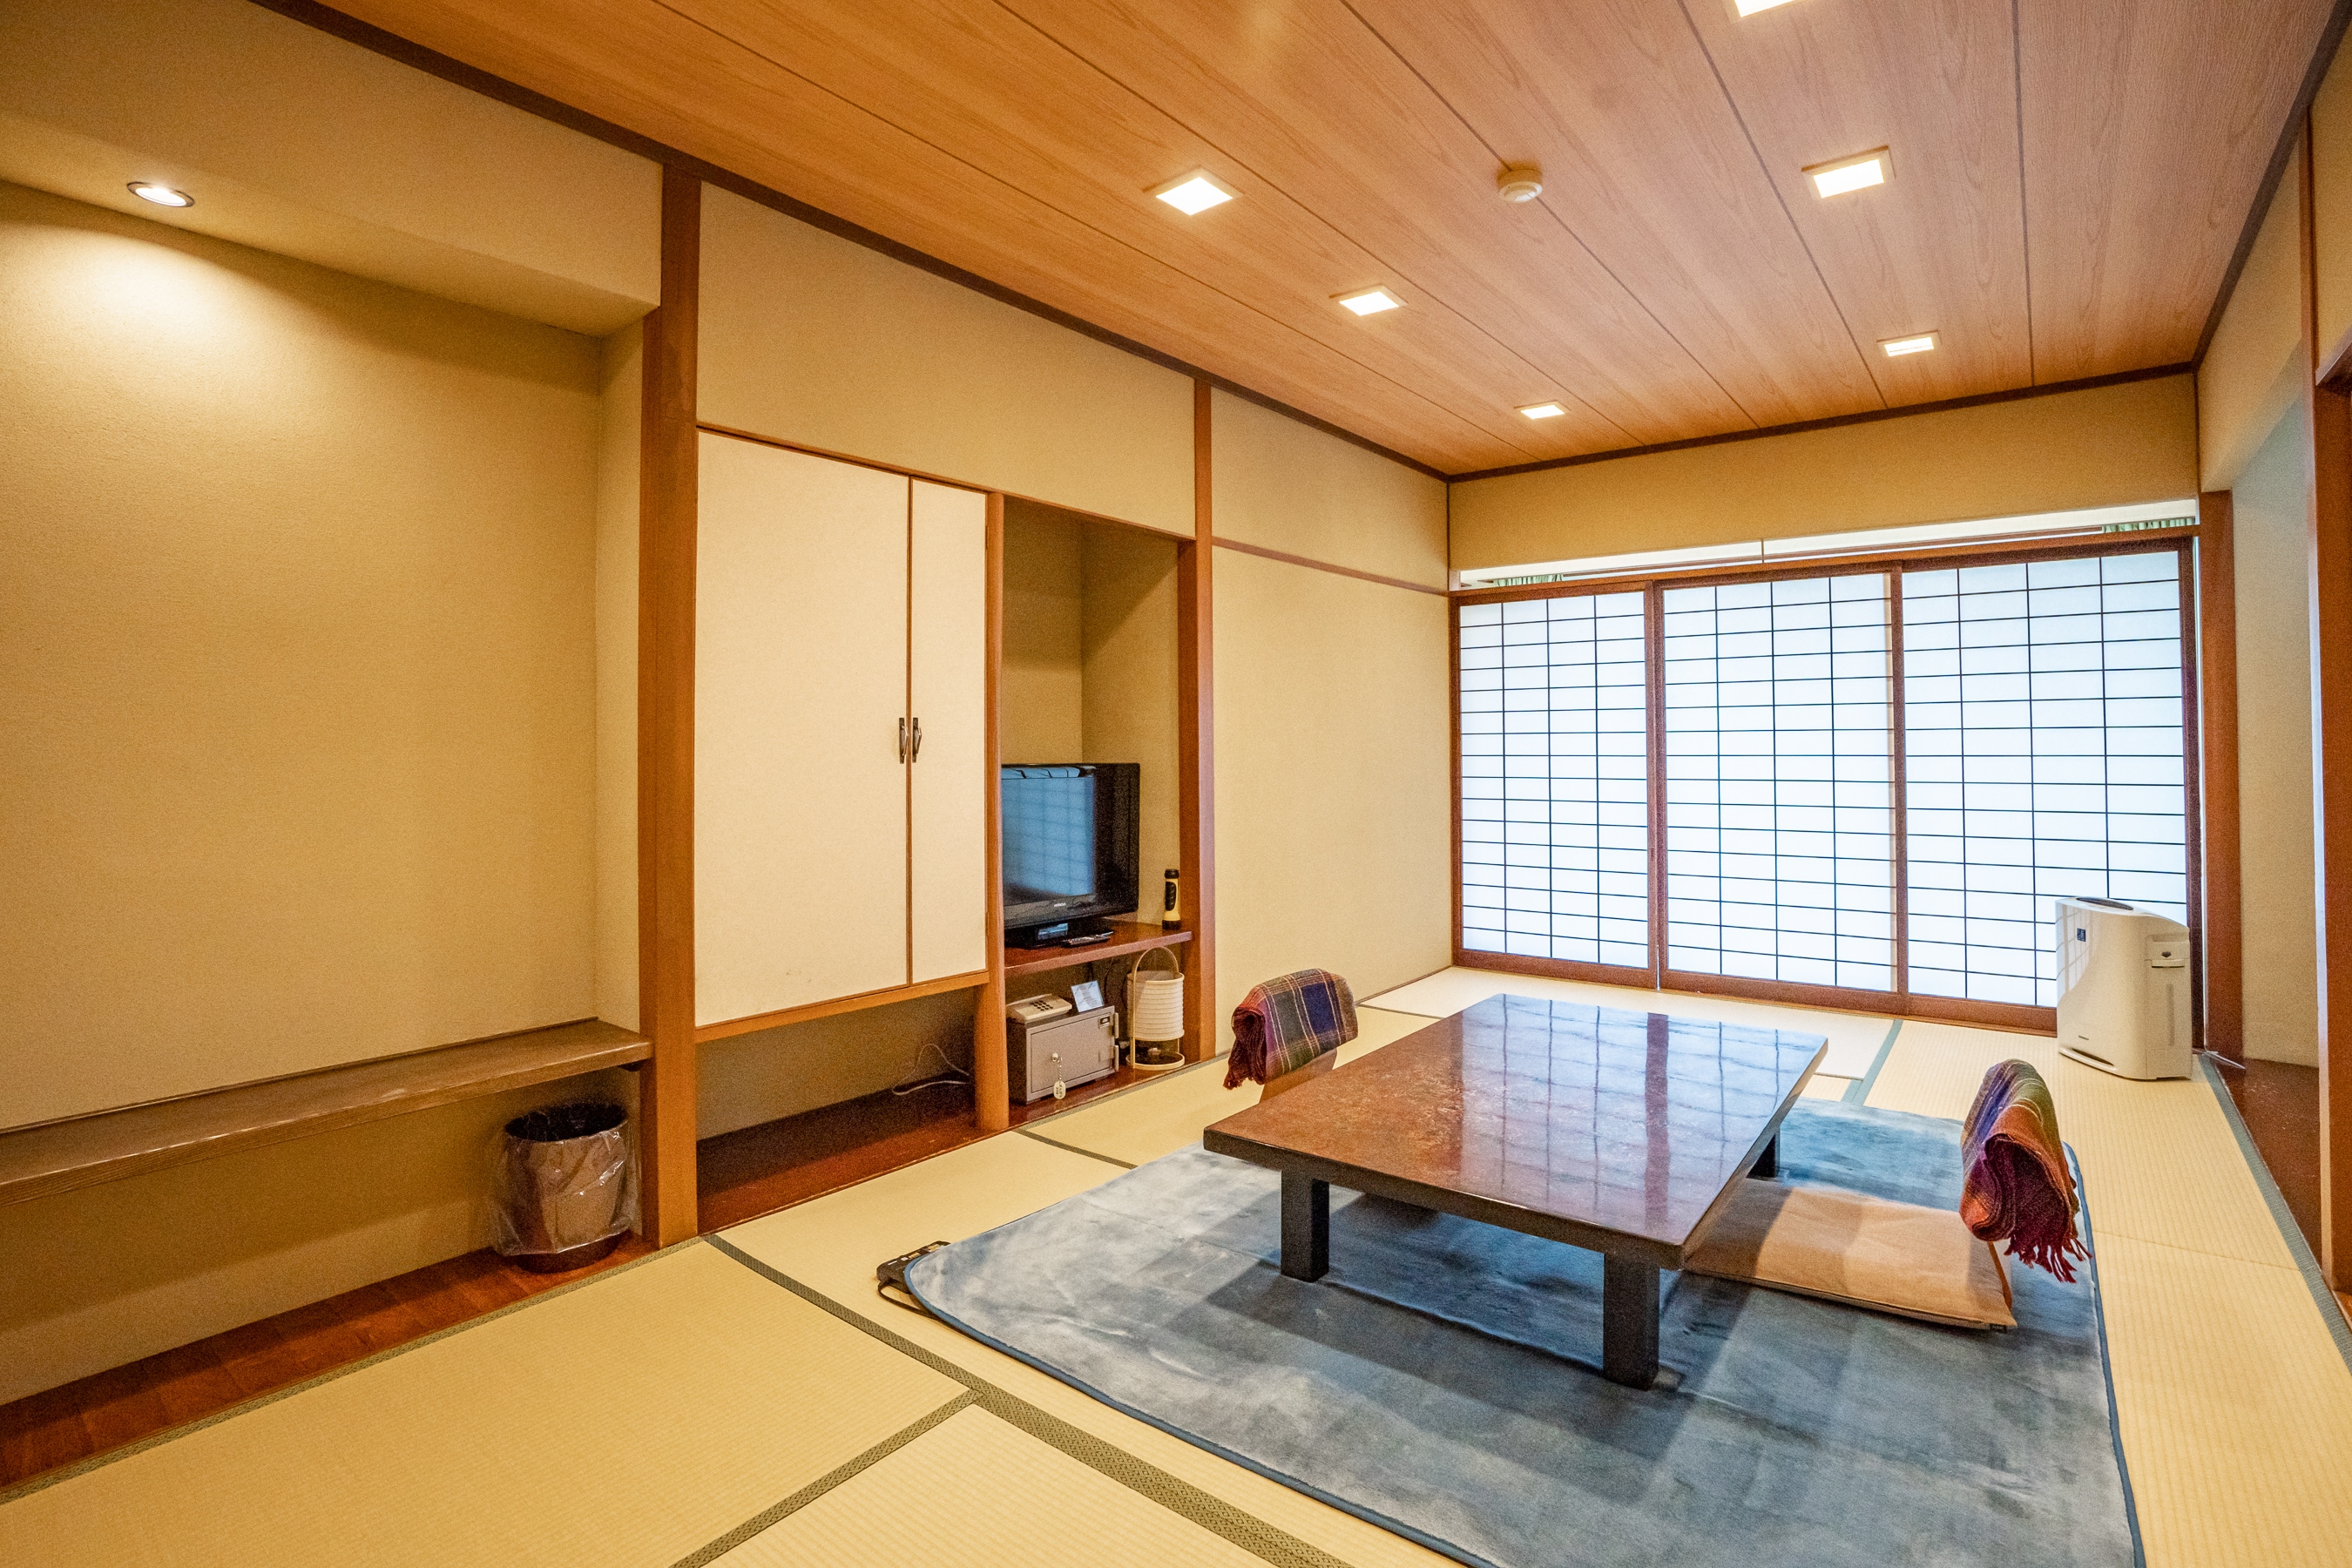 Annex Japanese-style room with bath and toilet